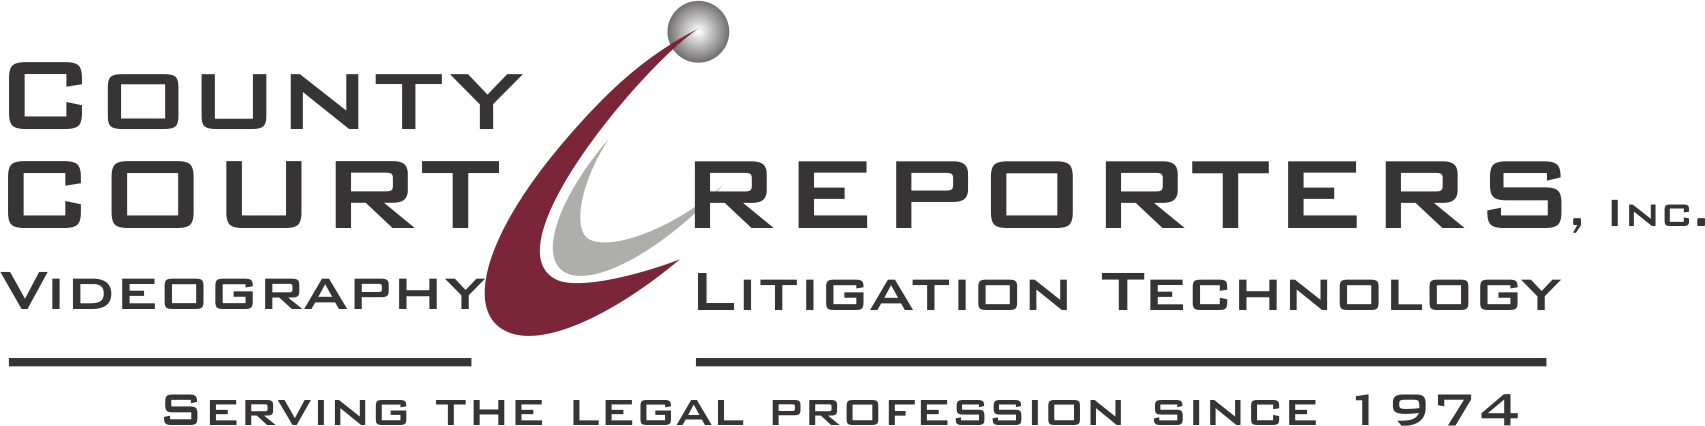 County Court Reporters Logo